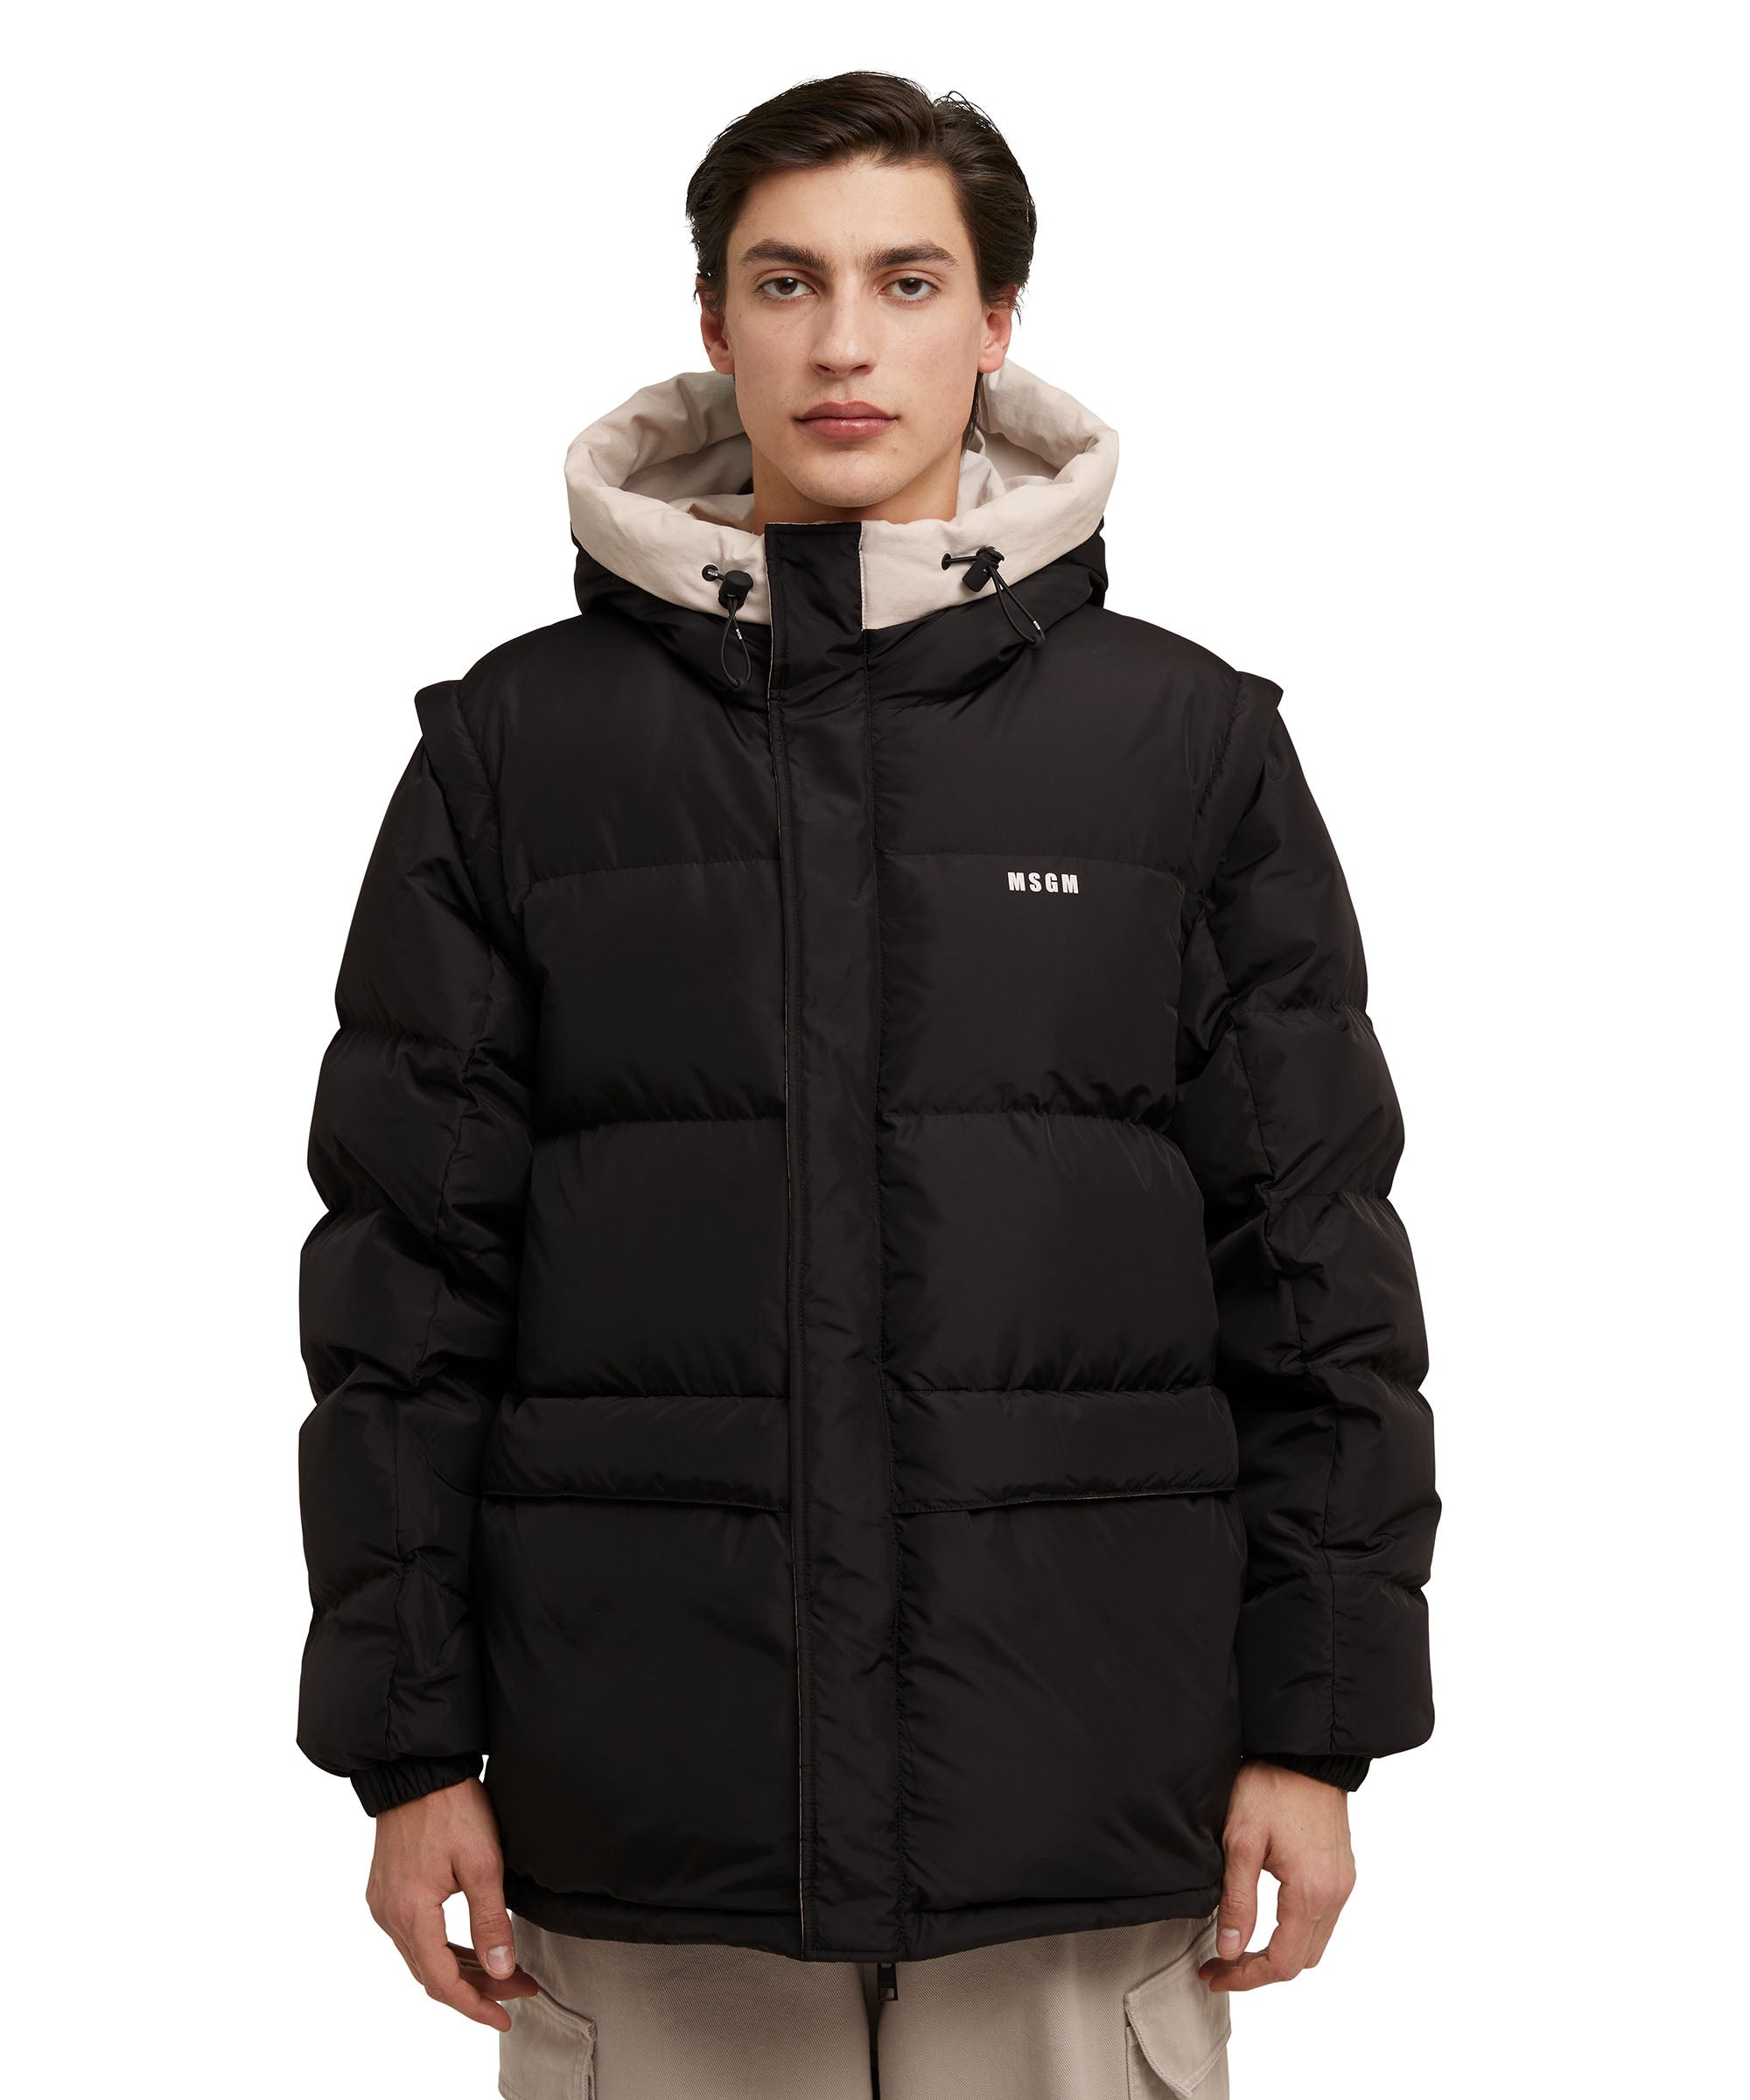 "Micro ripstop" down jacket with micro logo - 2